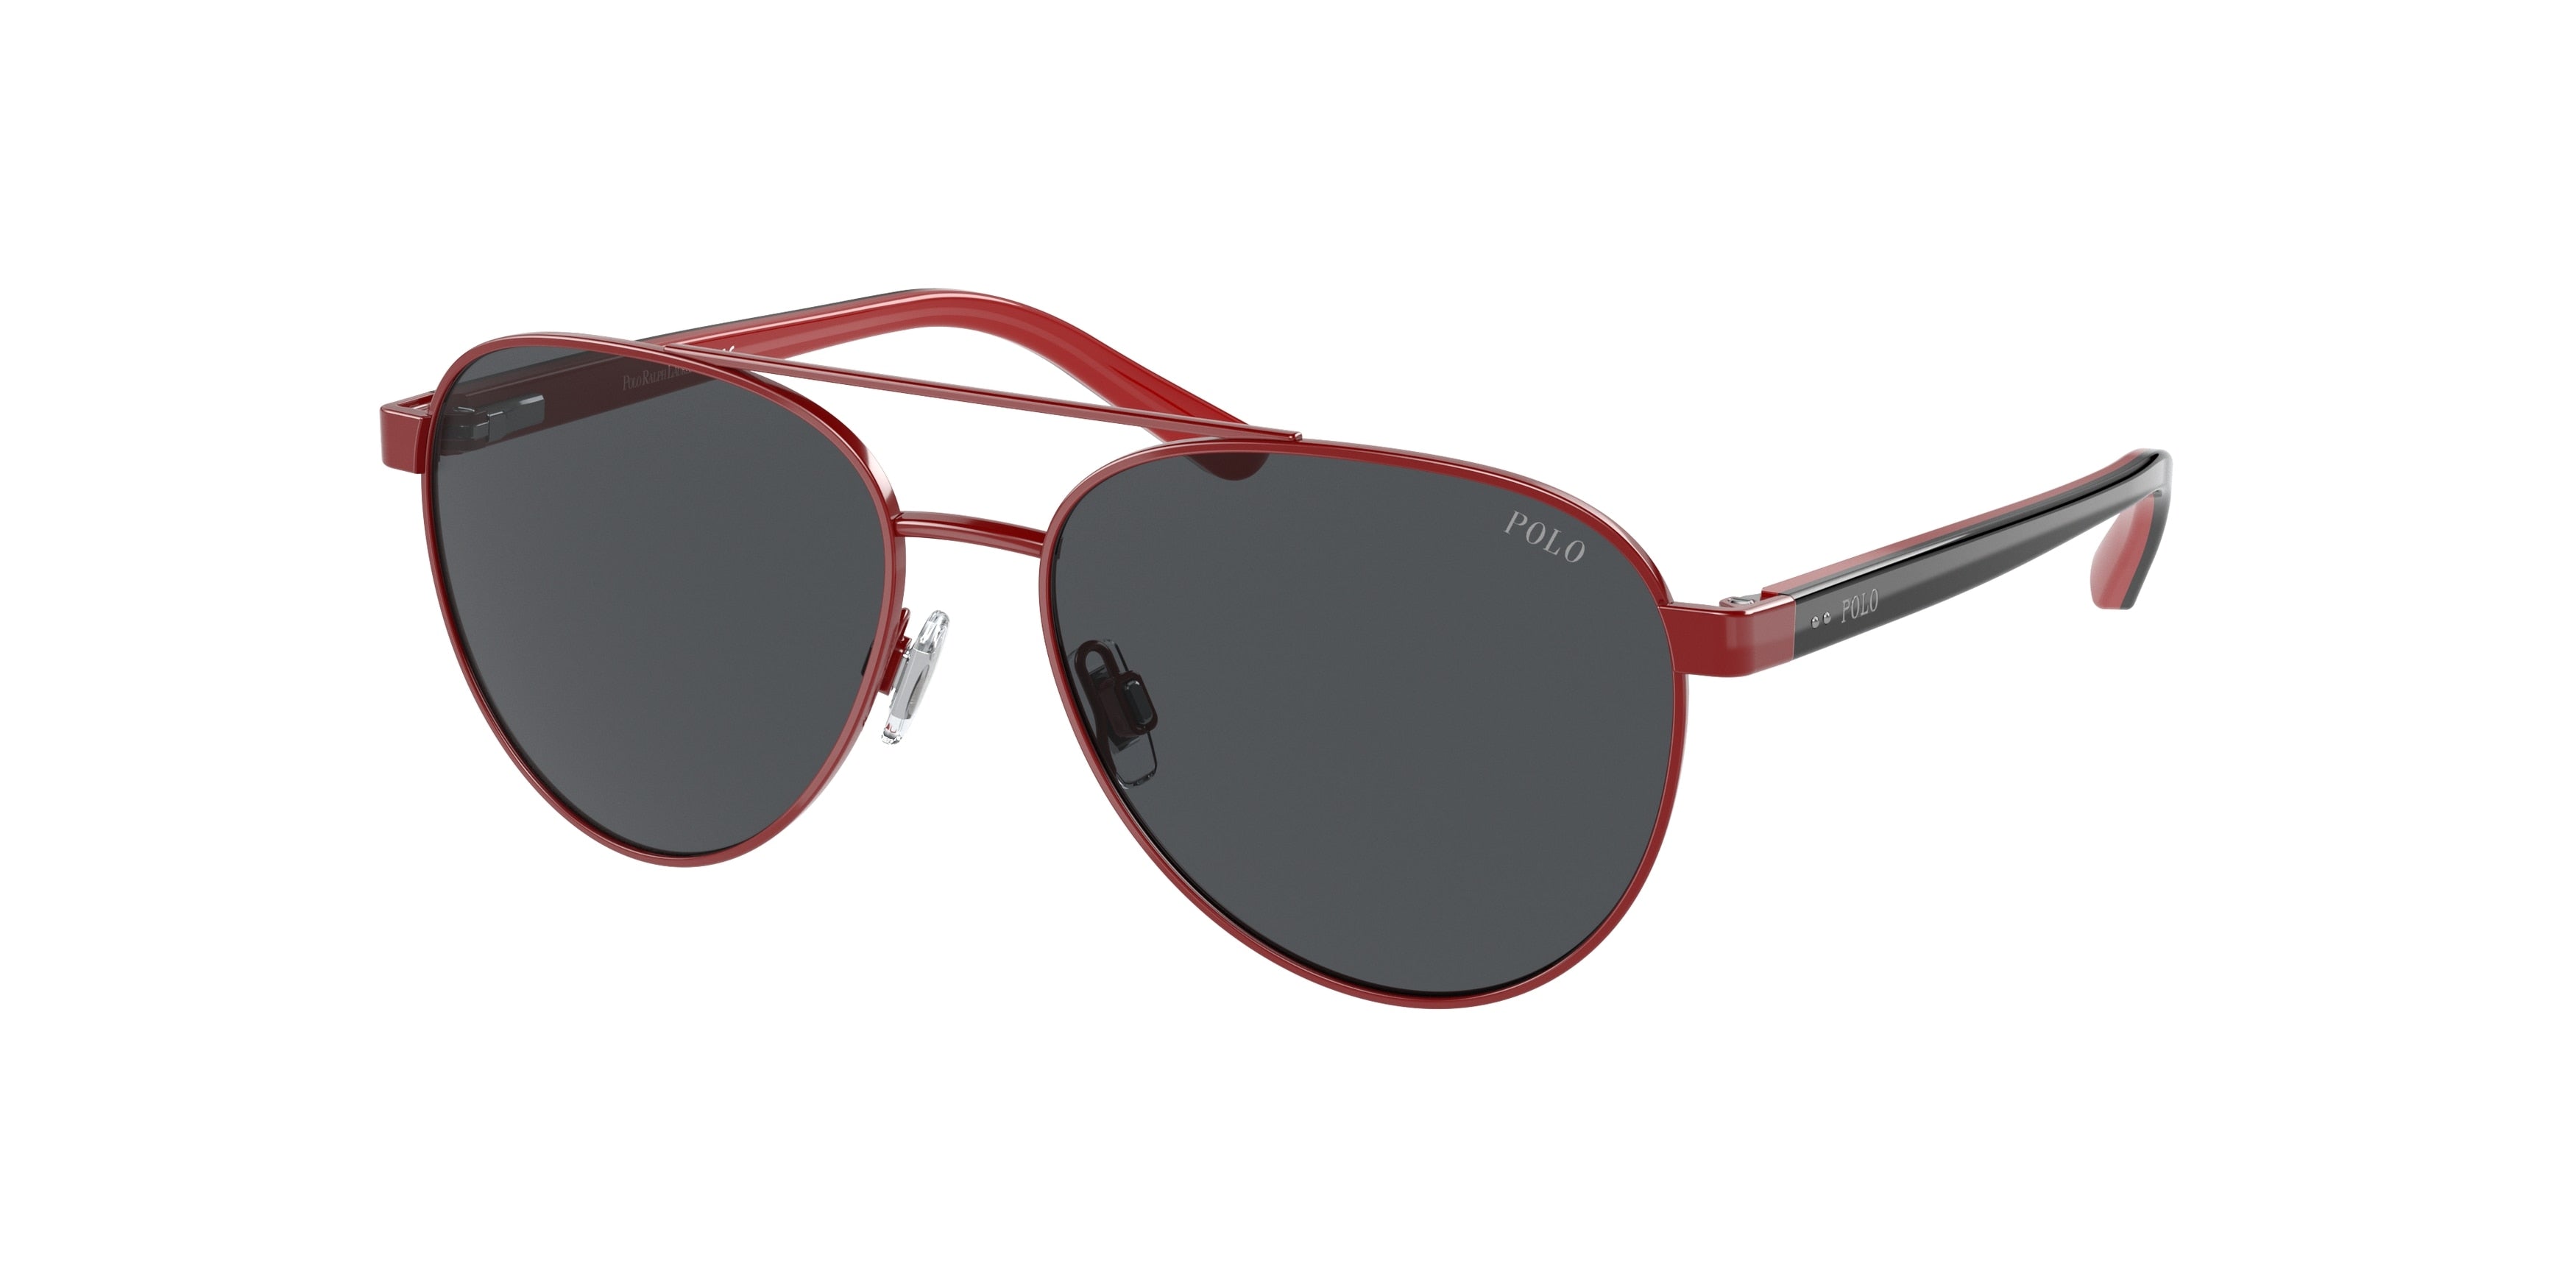 Polo Prep PP9001 Pilot Sunglasses  900687-Shiny Red 51-130-14 - Color Map Red